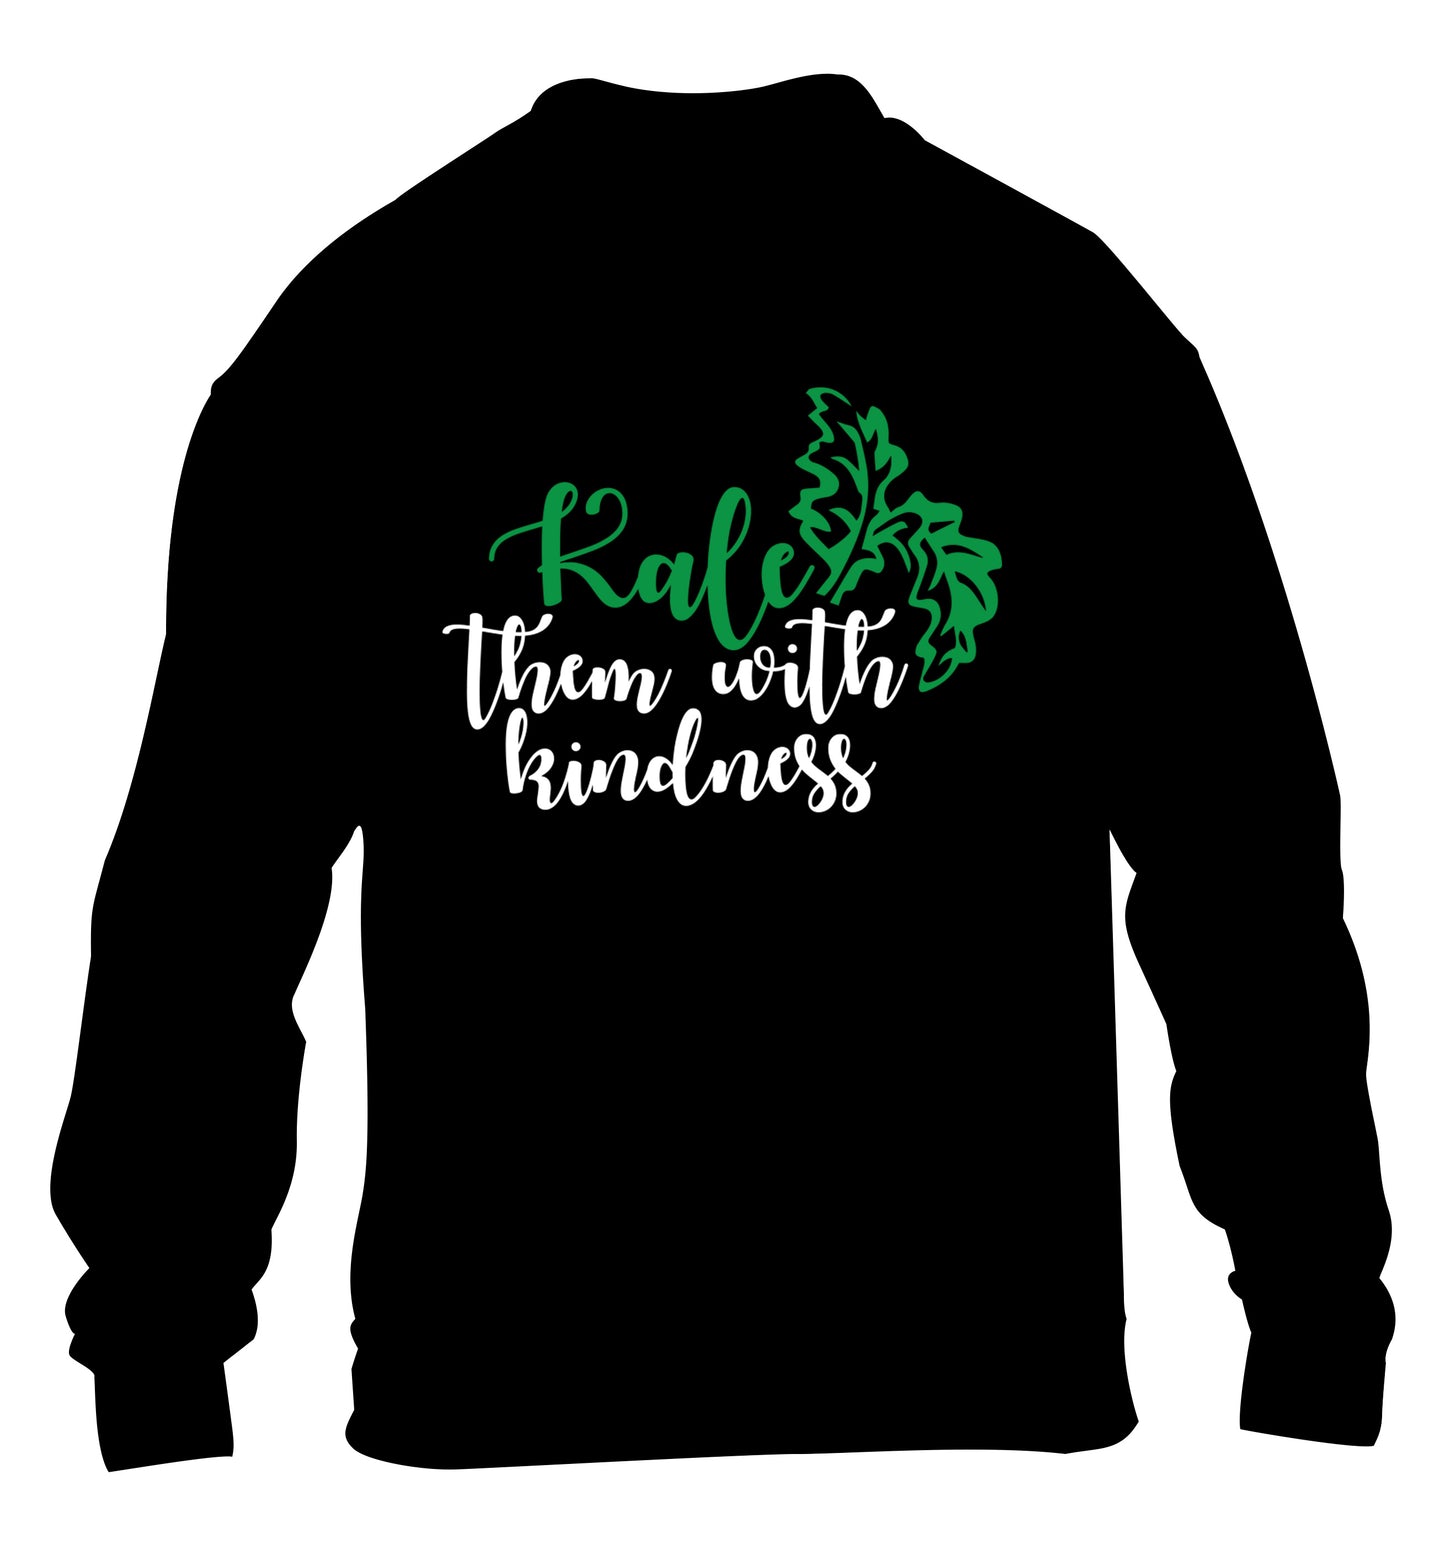 Kale them with kindness children's black sweater 12-14 Years